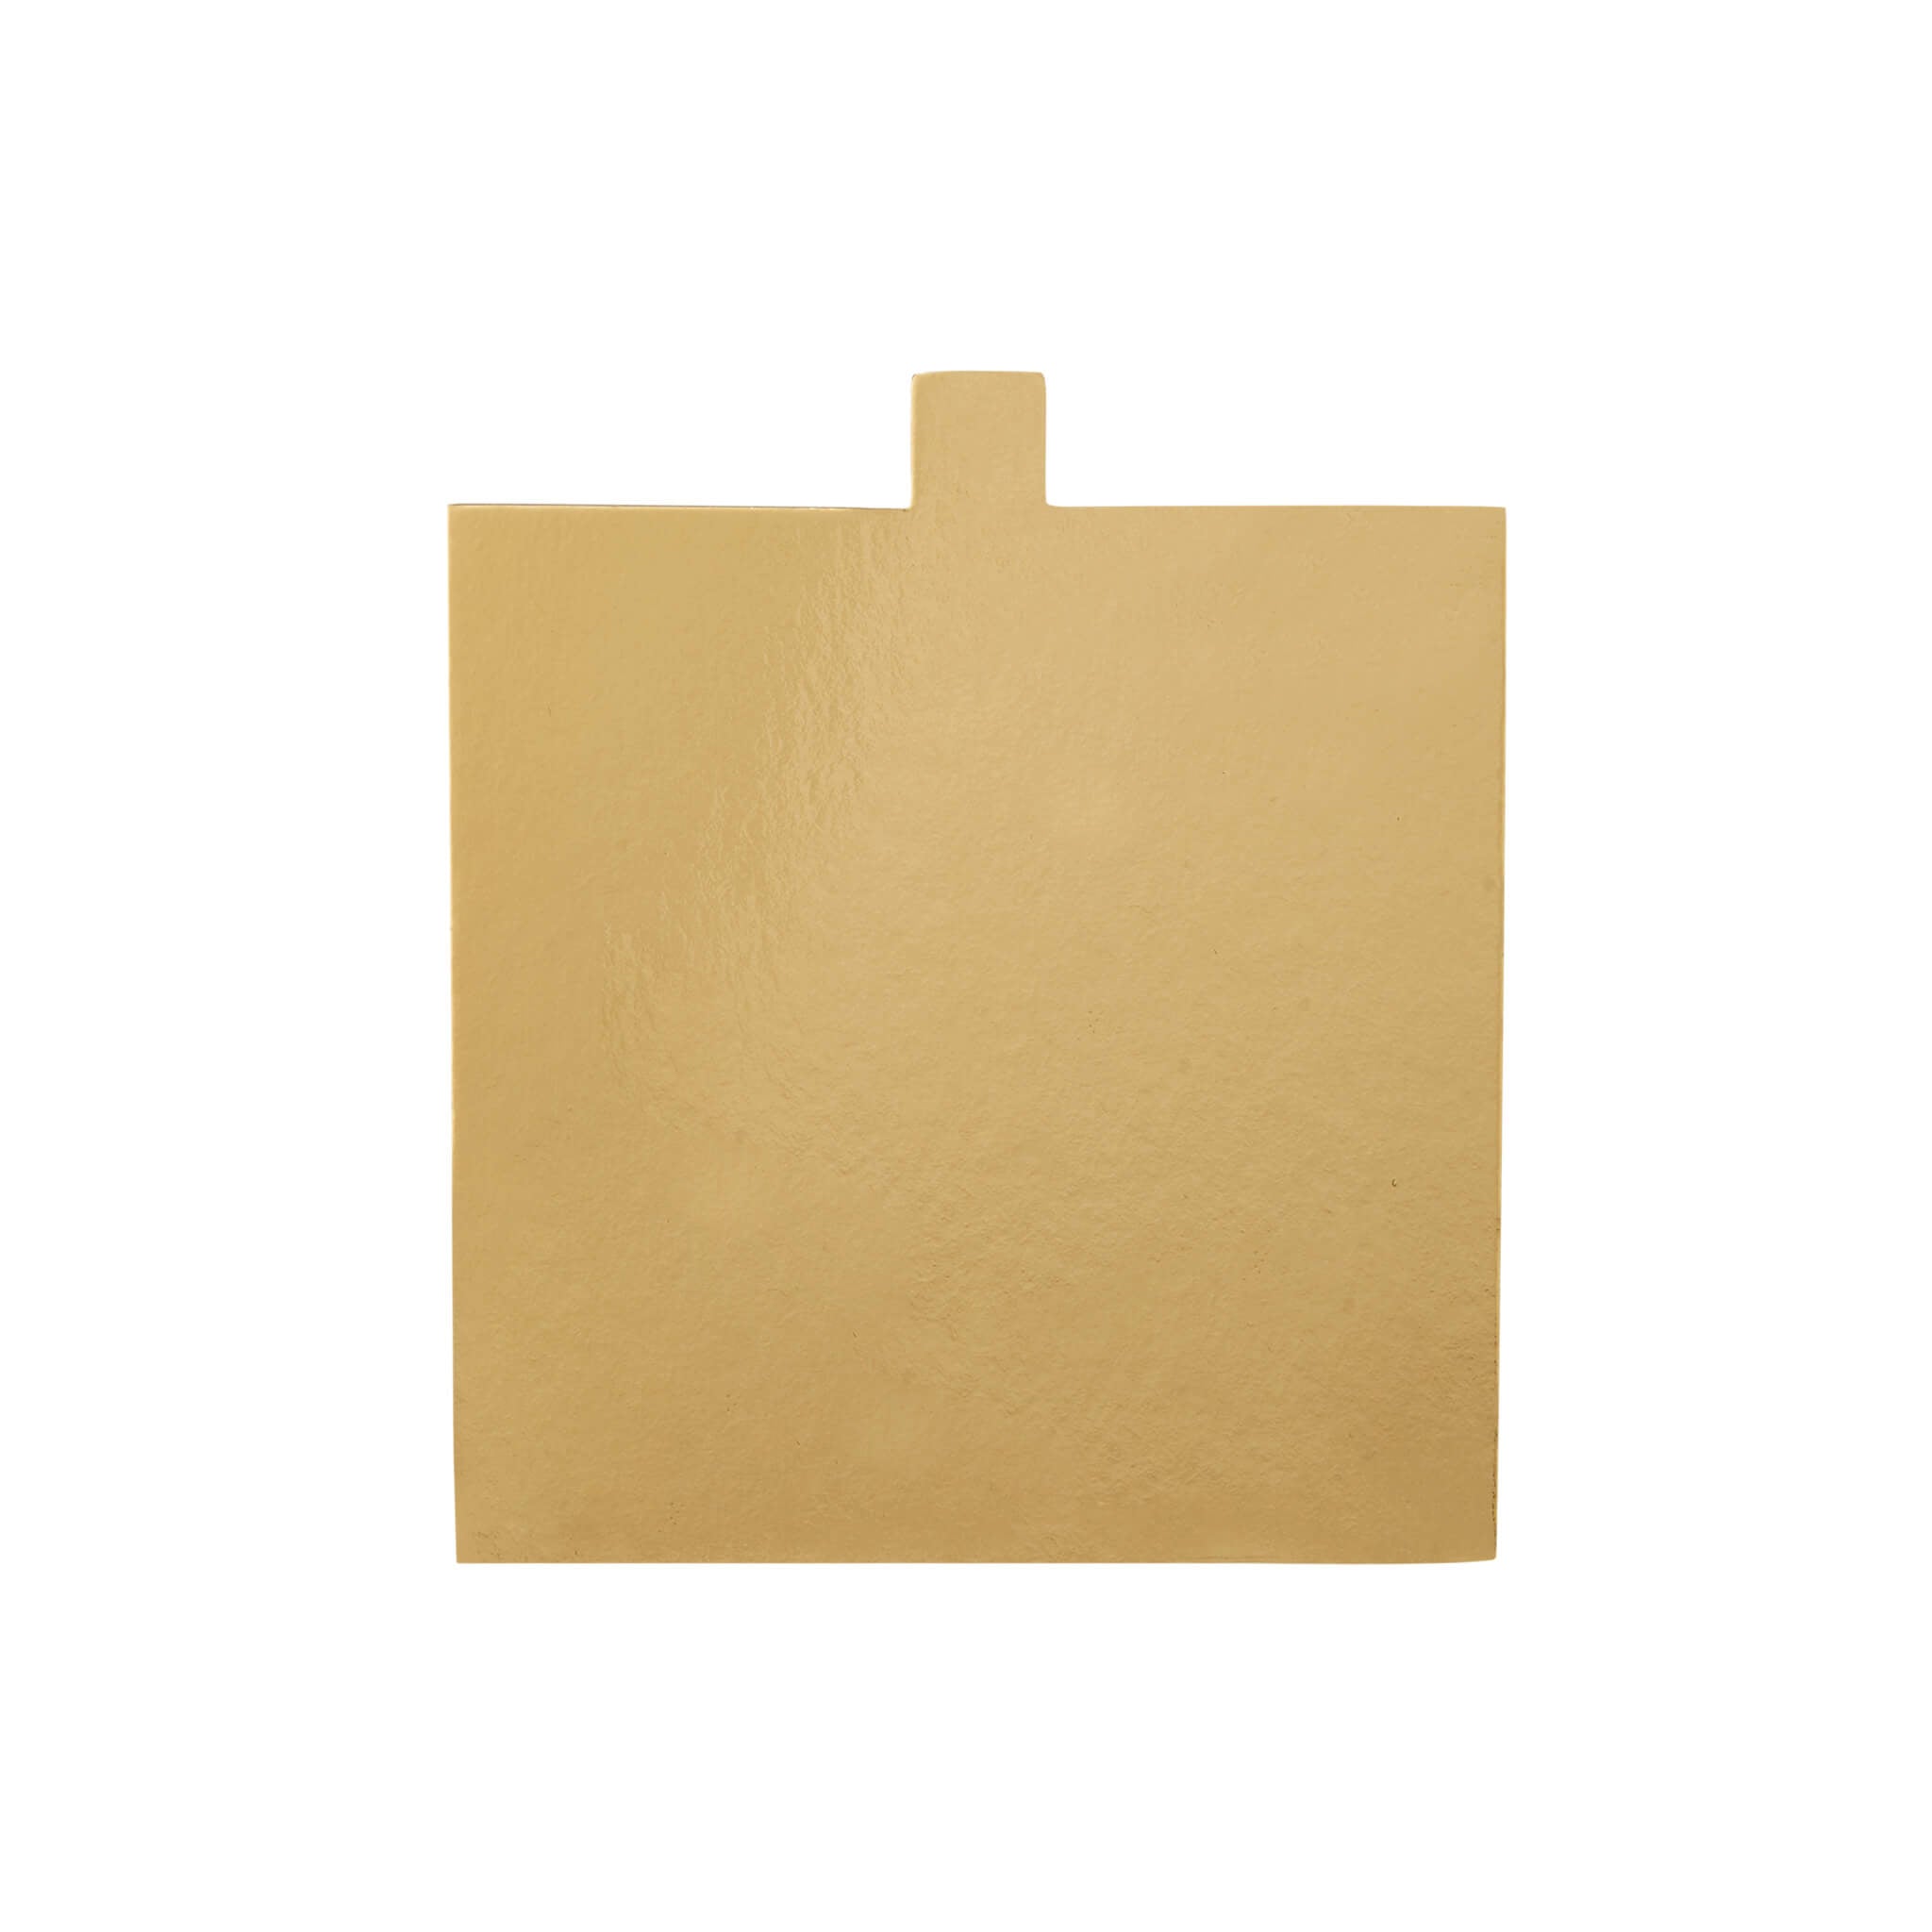 Square Gold Single Cake Piece Board 100 Pieces - Hotpack Global